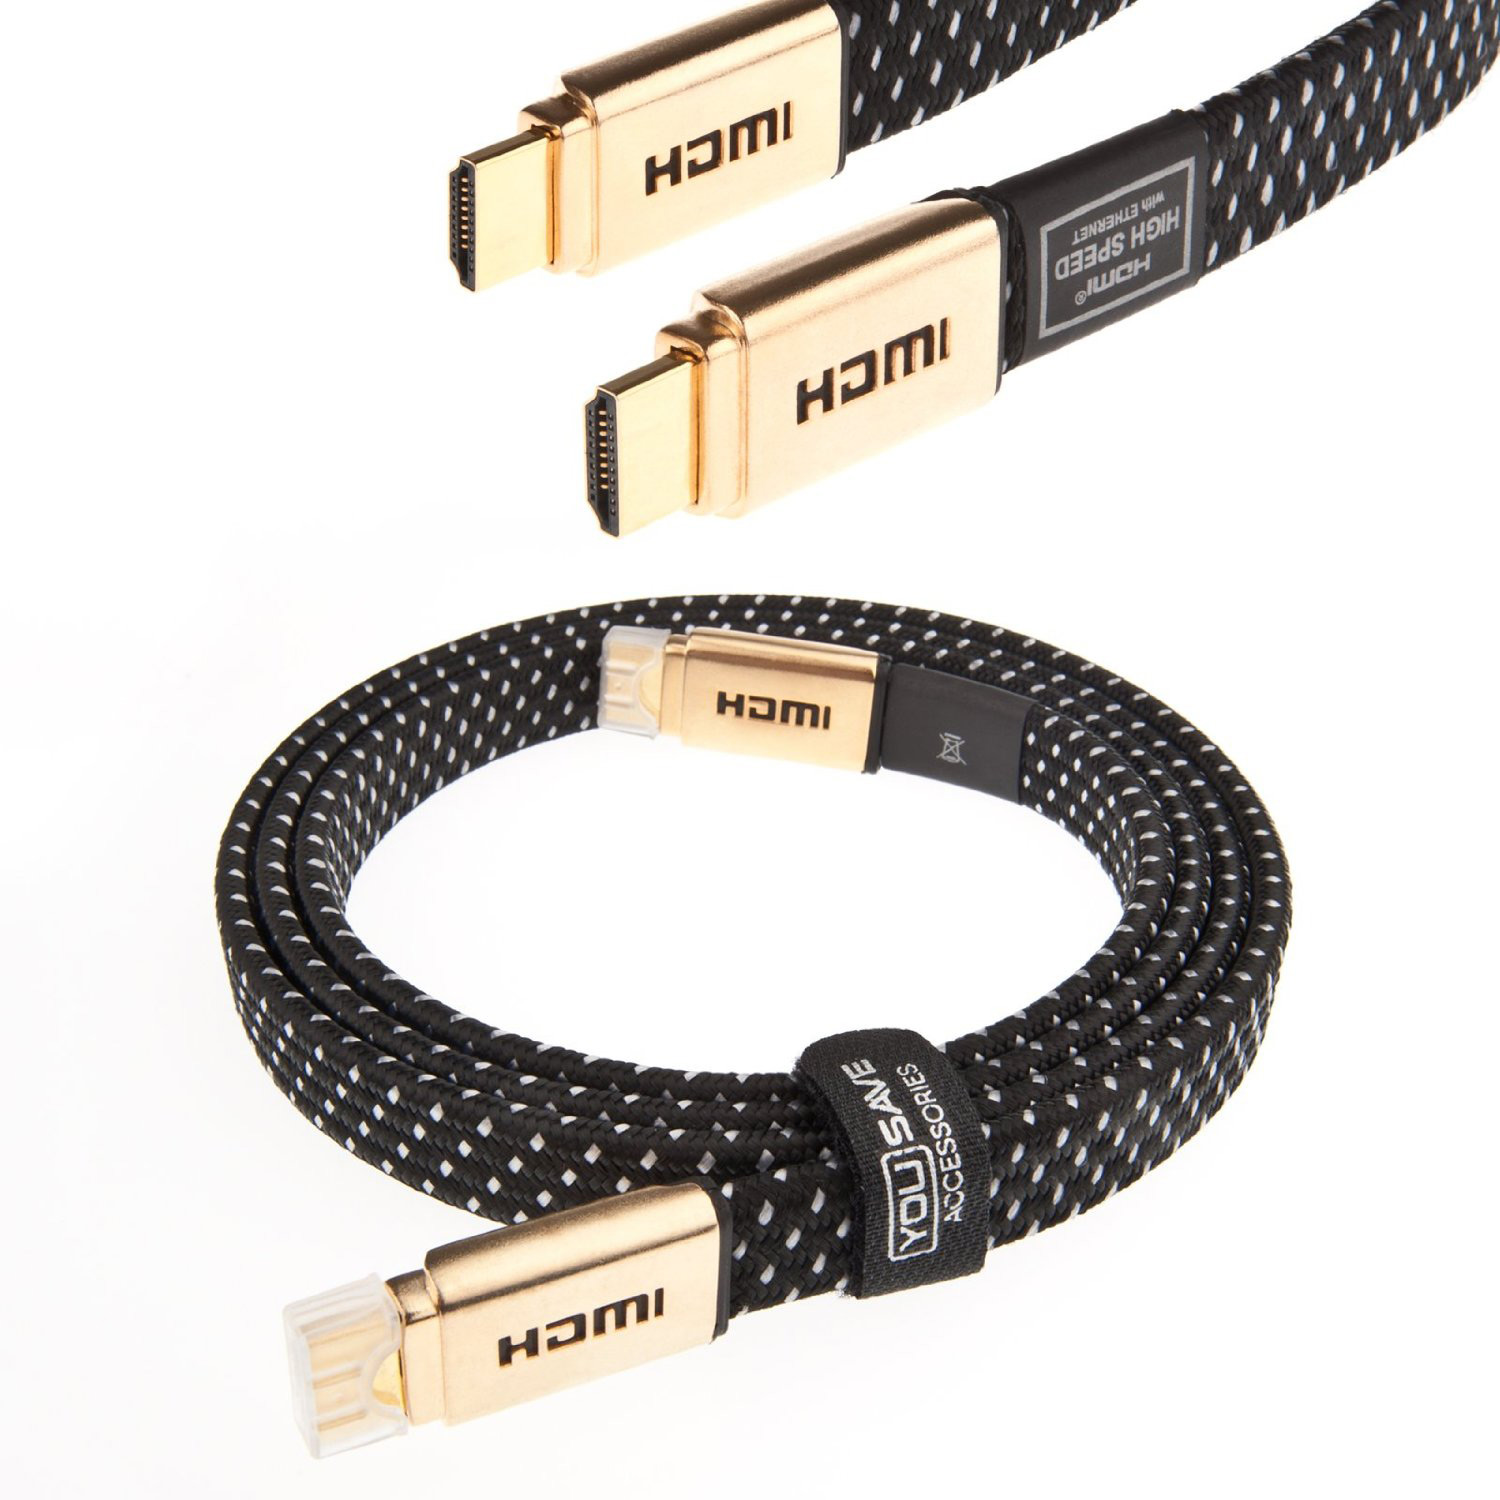 YouSave Accessories Accessories HDMI Cable 5M High Speed Gold Edition